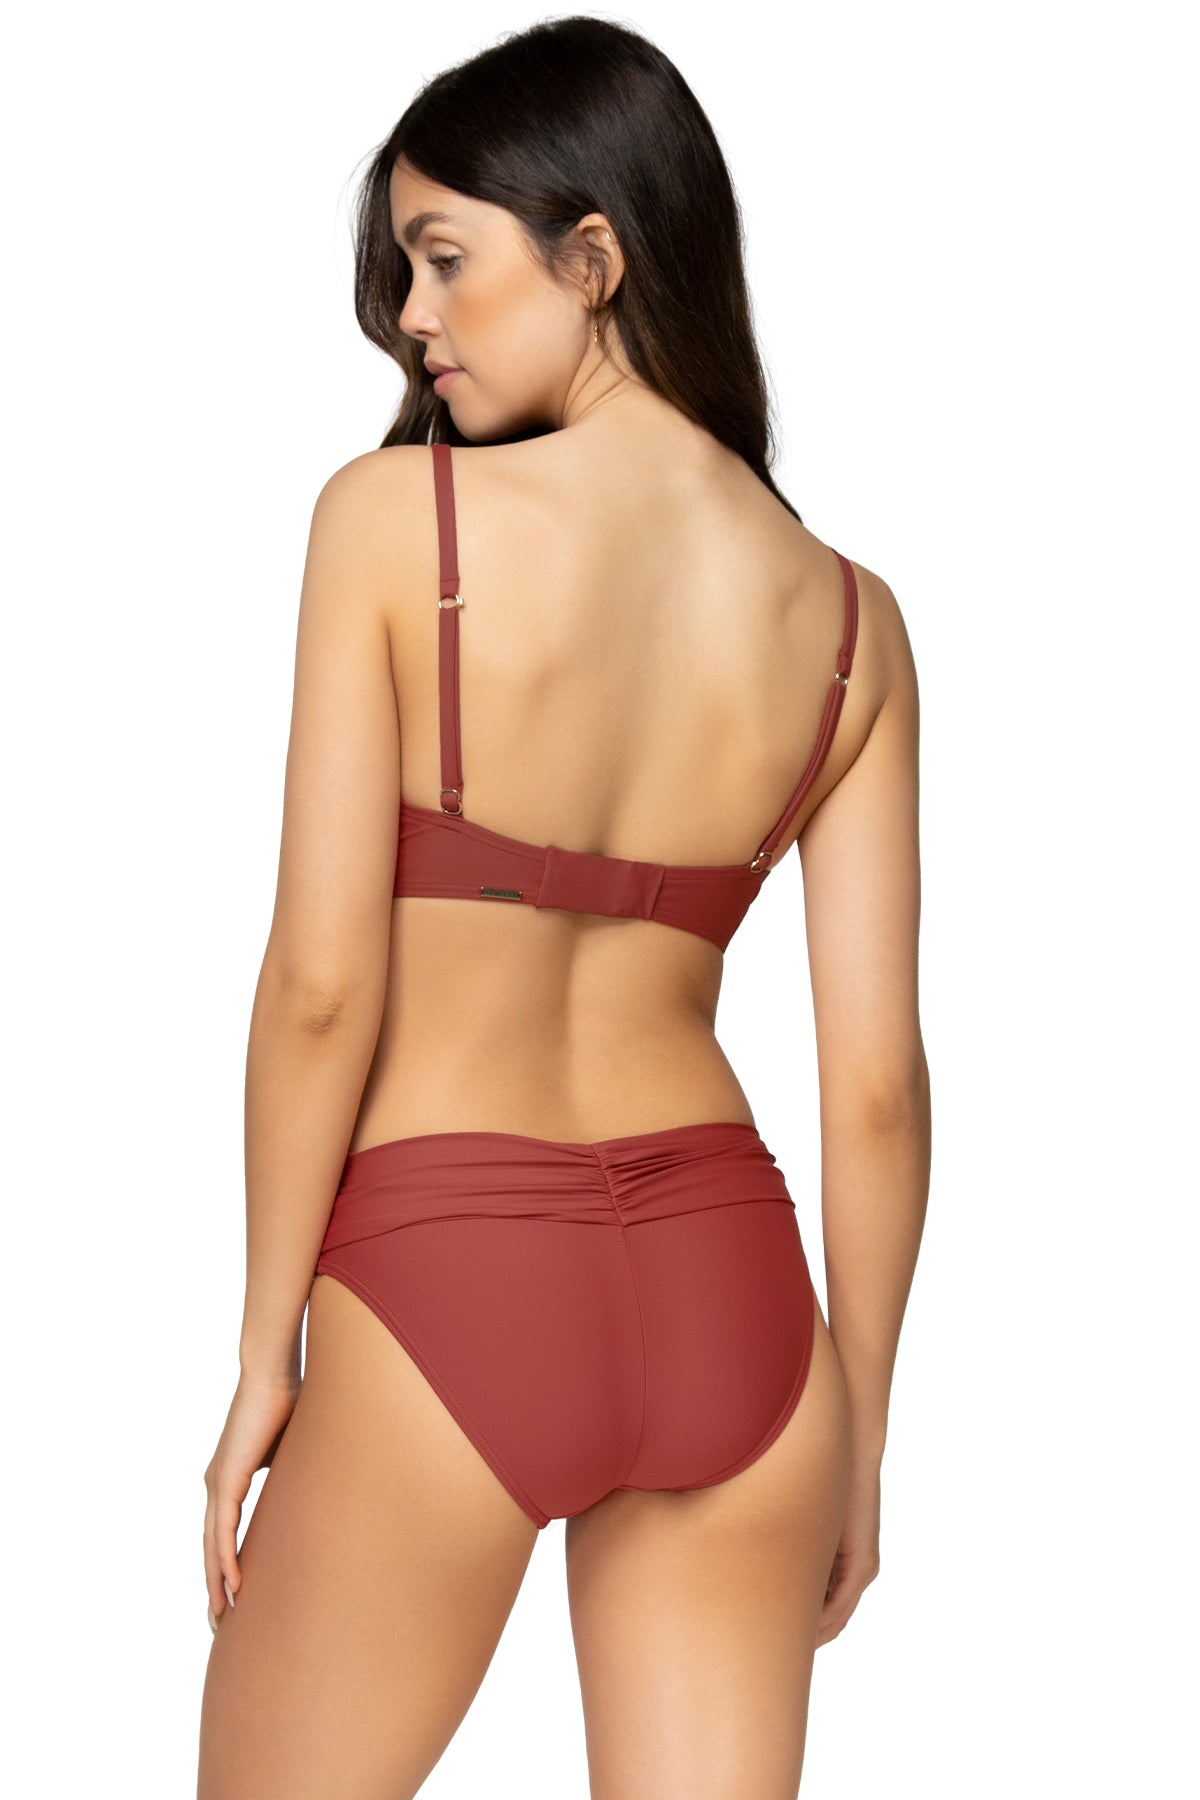 Back view of Sunsets Tuscan Red Kauai Keyhole Top